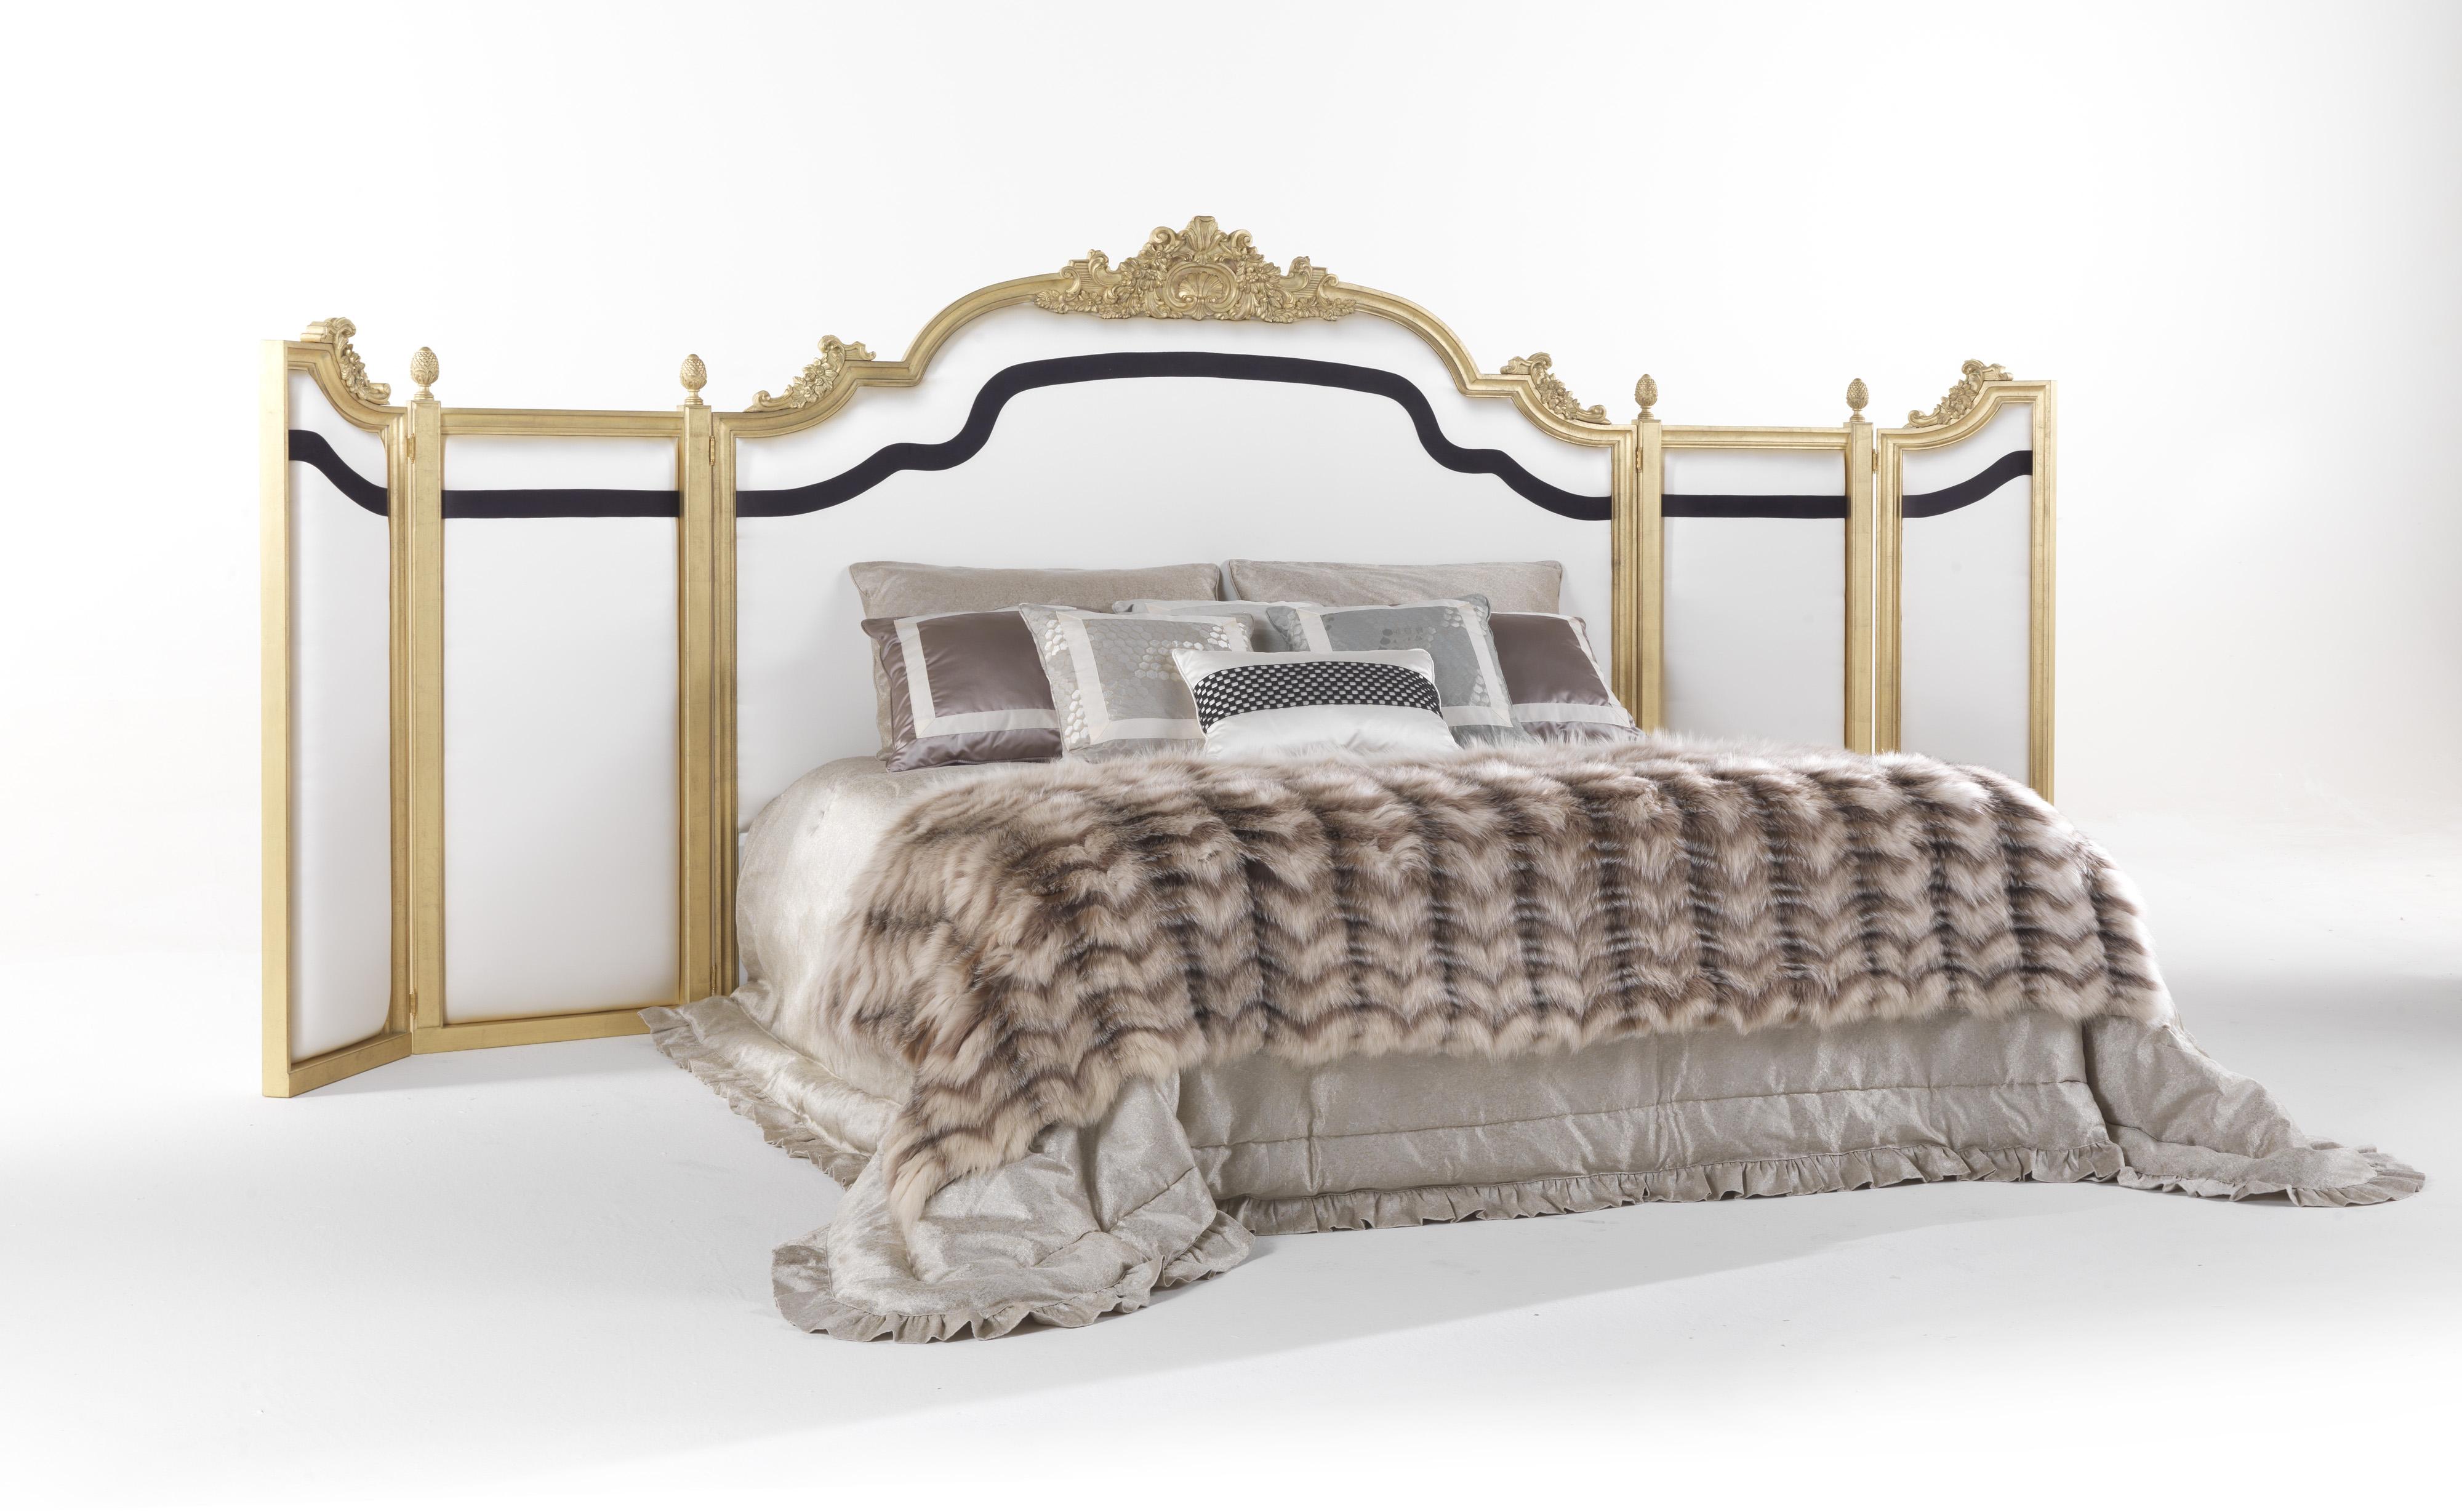 An impactful bed characterized by mobile panels embracing the night tables and the headboard. The refined game of lines created by the contrasting black strip adds movement to the movable panels, embellished by hand-carved wood decorations with